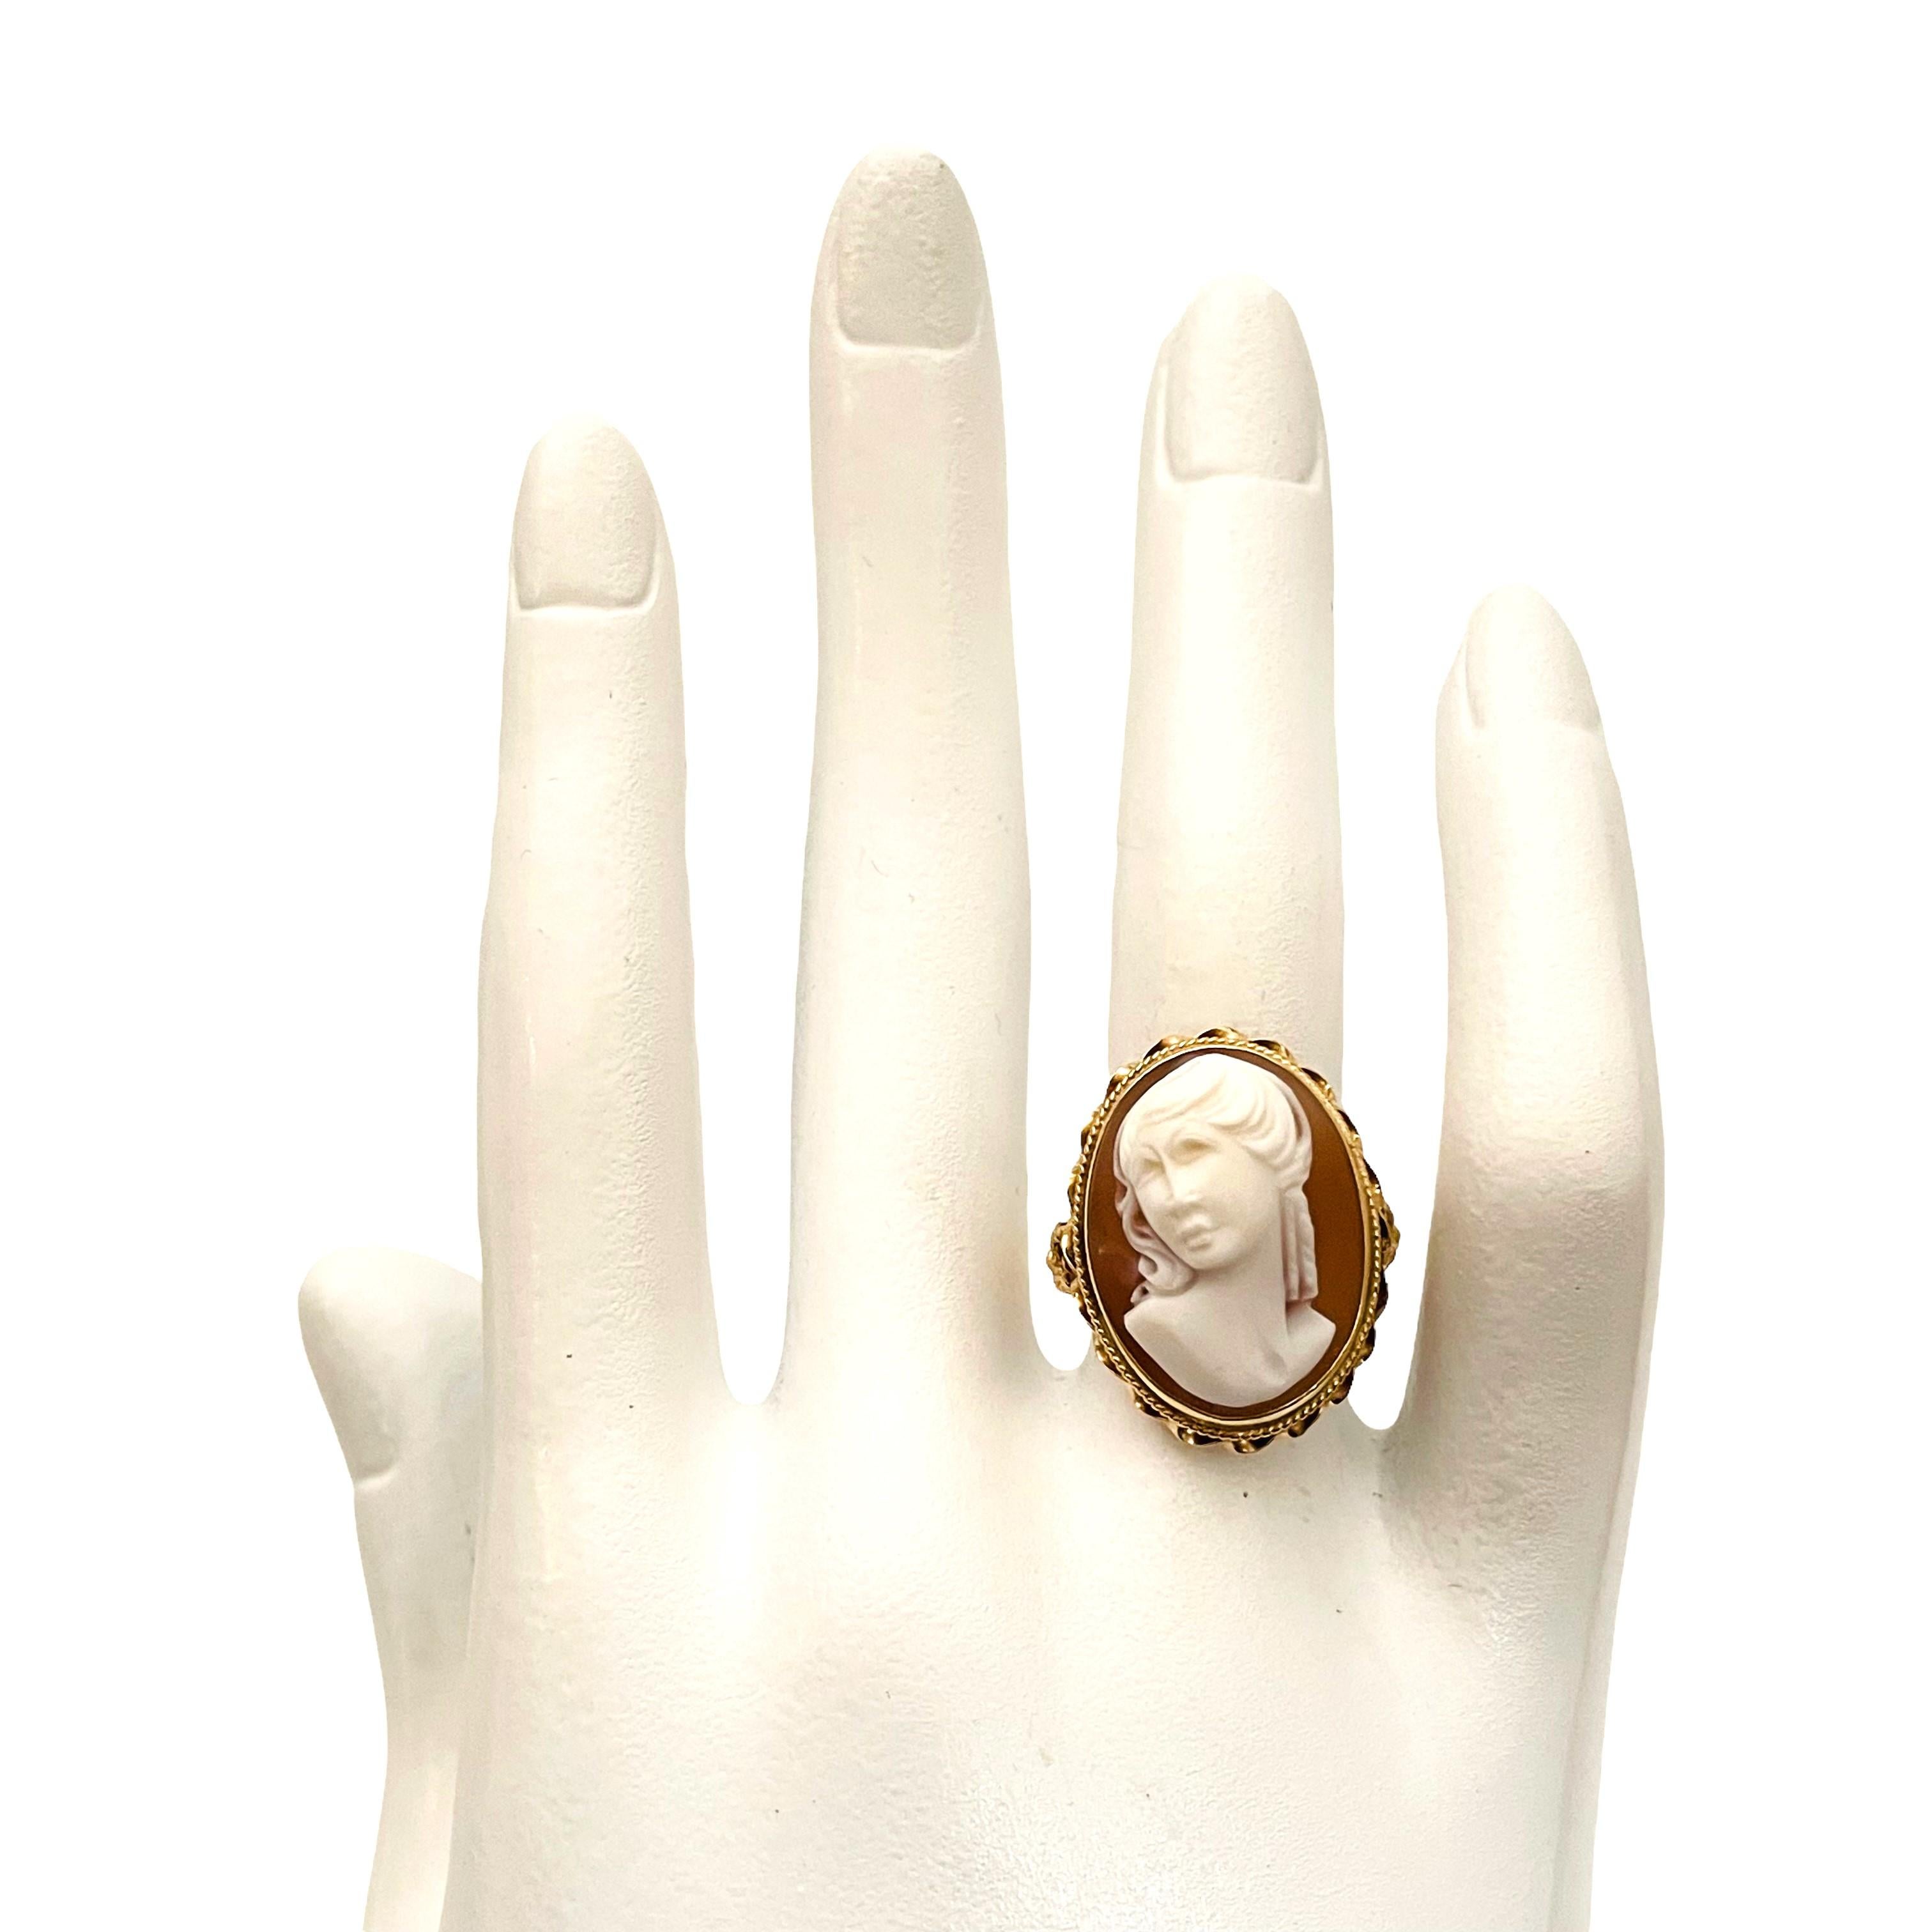 This is a very unusual Cameo ring.  The cameo is large and although it is raised it is not flat like other cameo's.  It's shaped very nicely.   A real treasure!  The Appraisal is the secondary retail market, not insurance purposes which would be